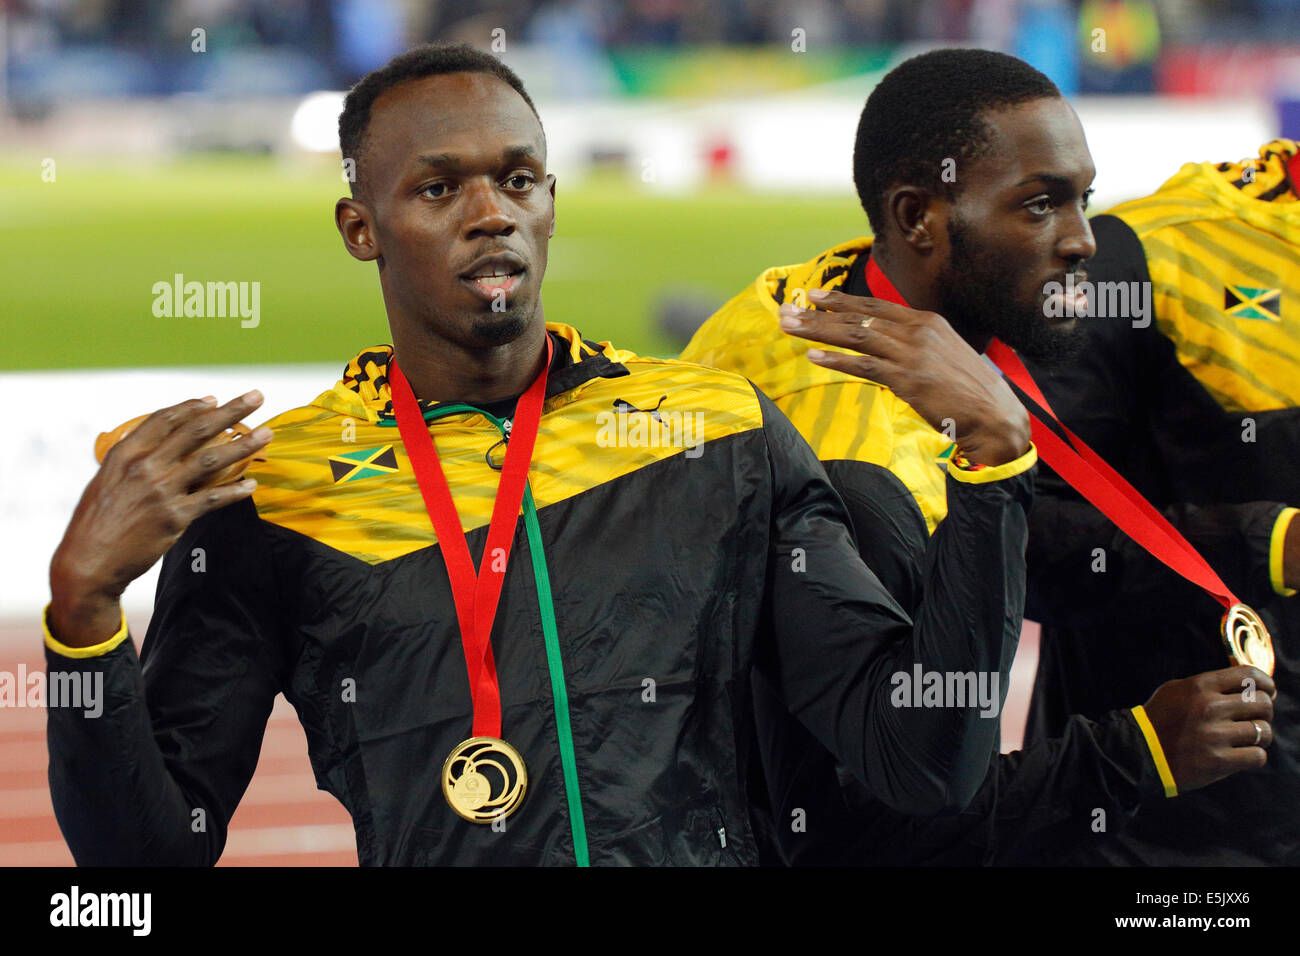 Hampden Park, Glasgow, Scotland, UK, Saturday, 2nd August, 2014. Glasgow 2014 Commonwealth Games, Men's 4 x 100m Relay, Medal Ceremony. Left to Right. Usain Bolt and Nickel Ashmeade, Jamaica, with their Gold Medals Stock Photo